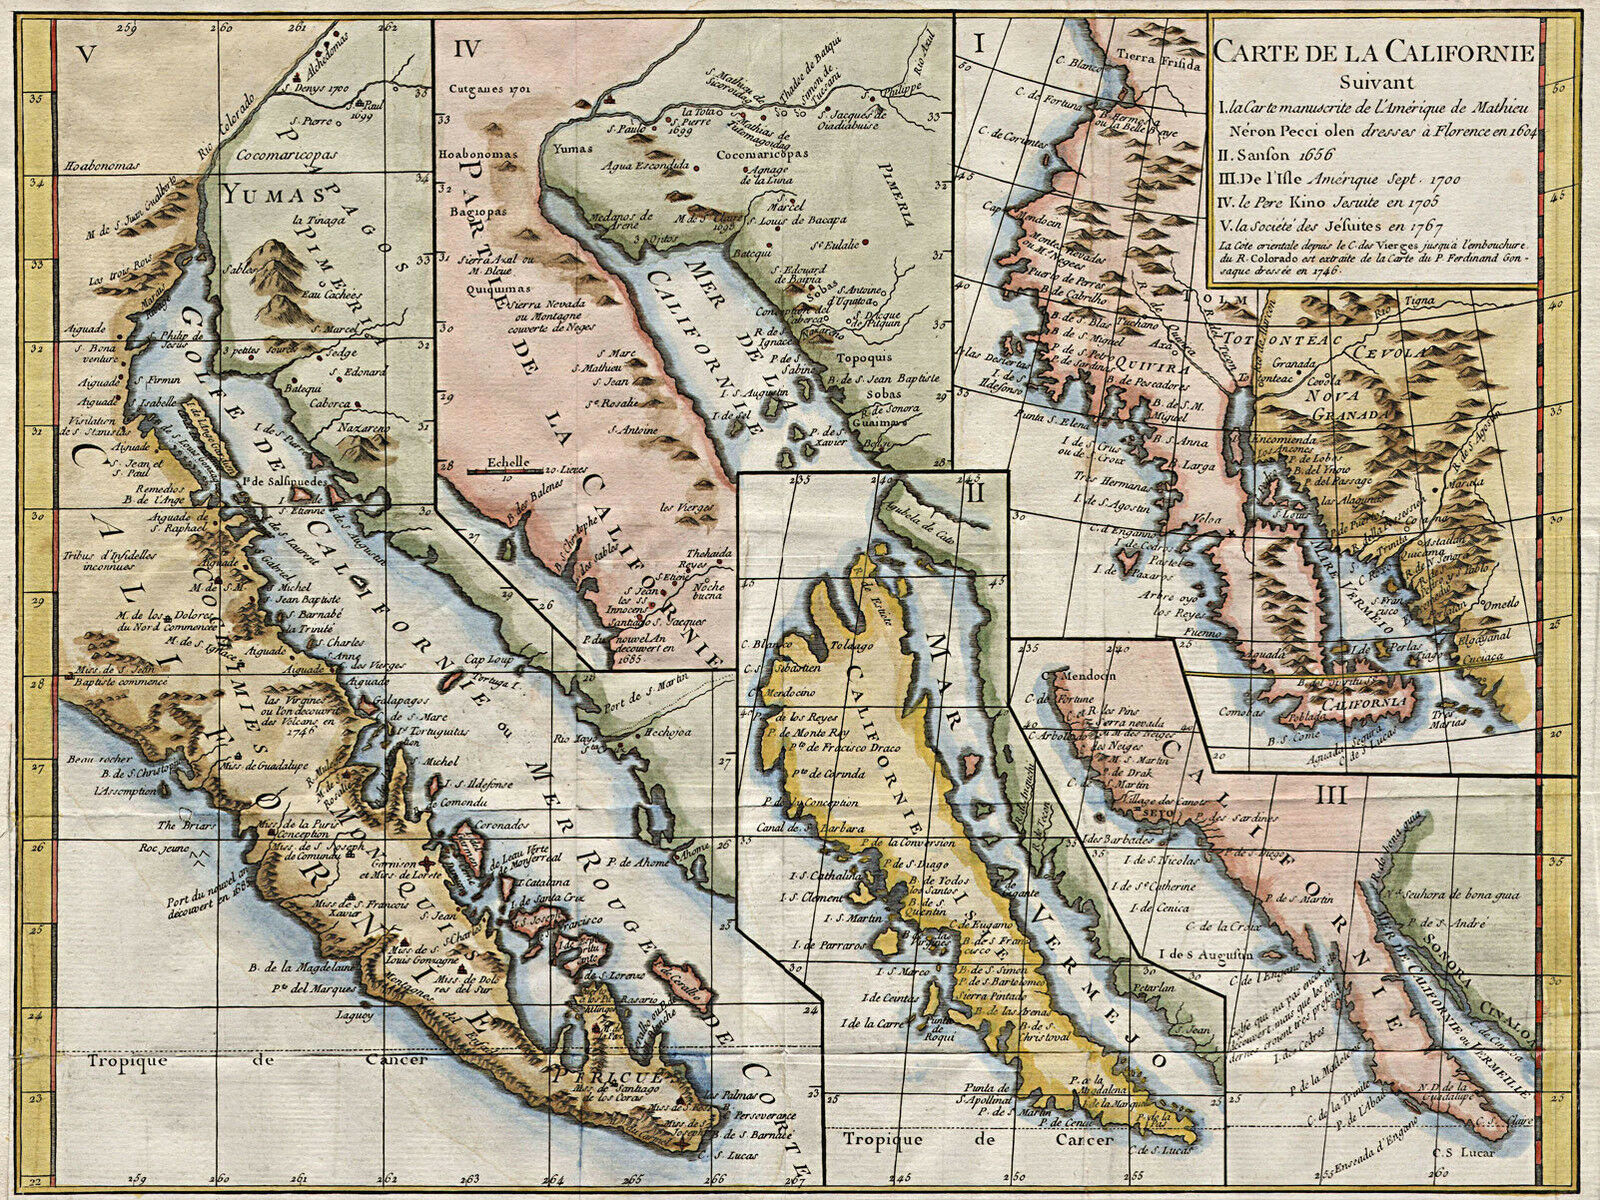 Baja California Map In Five Different States 1656-1767 Home School 11x15 Poster